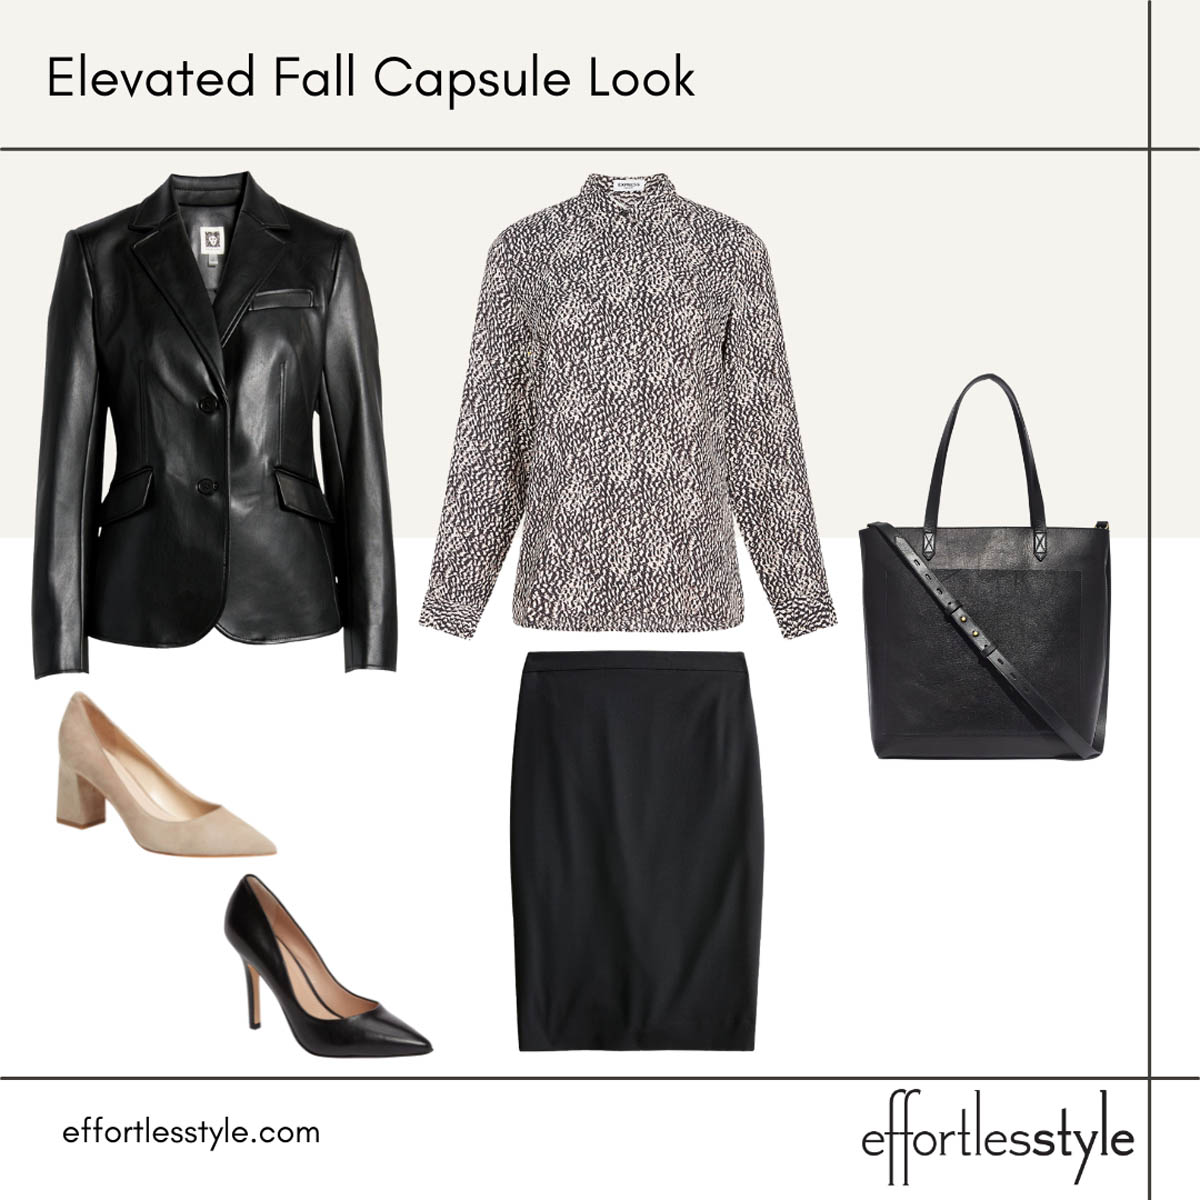 Black Leather Blazer and Pencil Skirt Look What to Wear to the Office